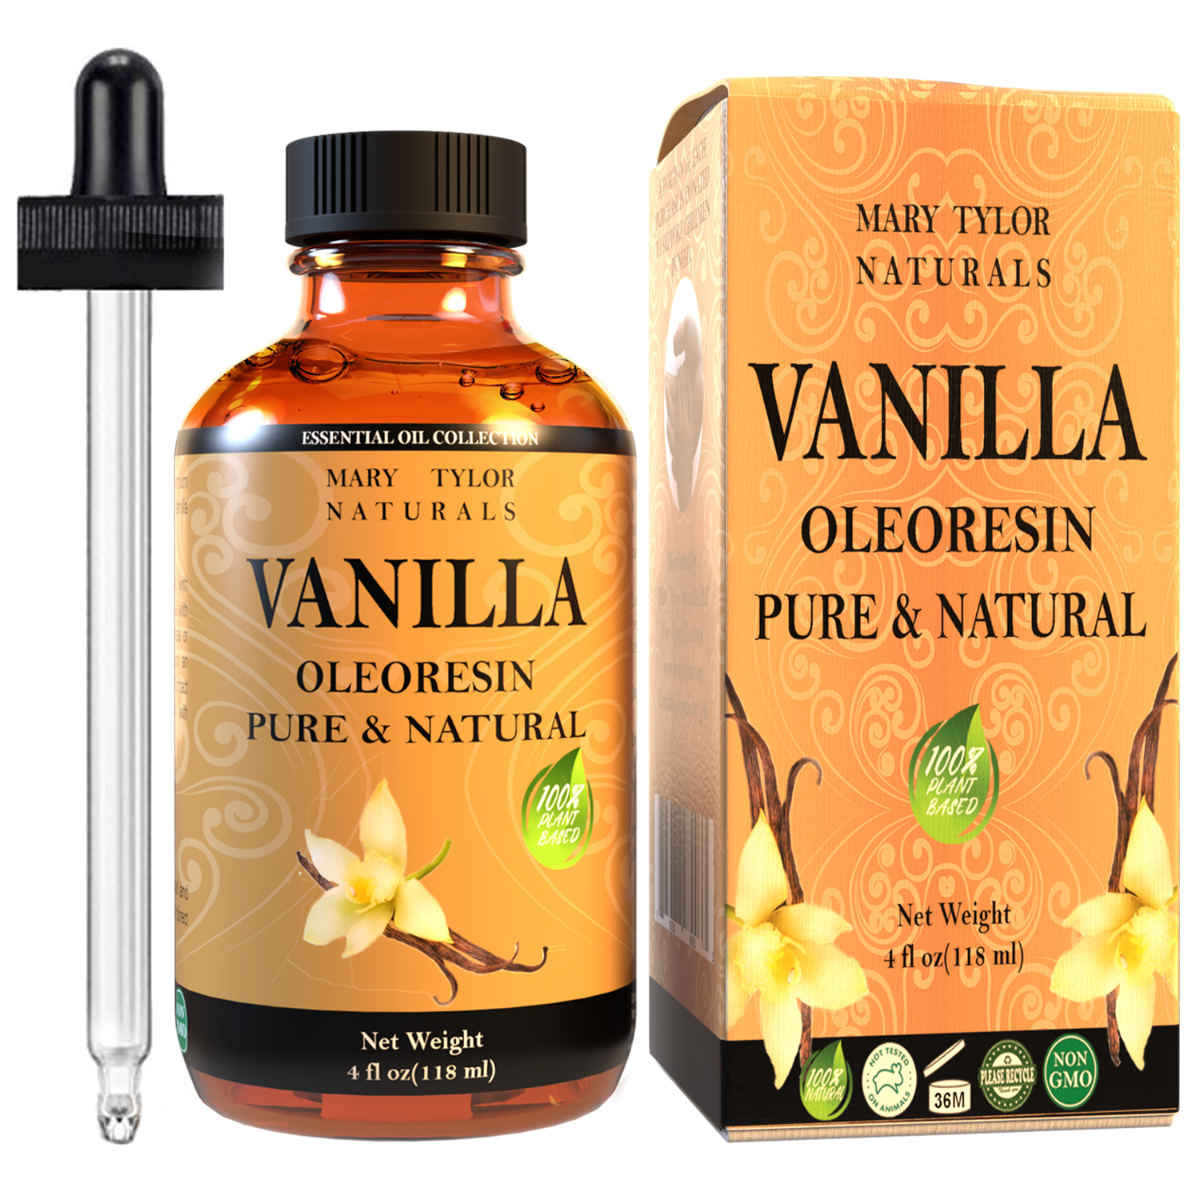 All About Vanilla Oleoresin  Essential oil diffuser blends recipes,  Essential oil diffuser recipes, Essential oil blends recipes